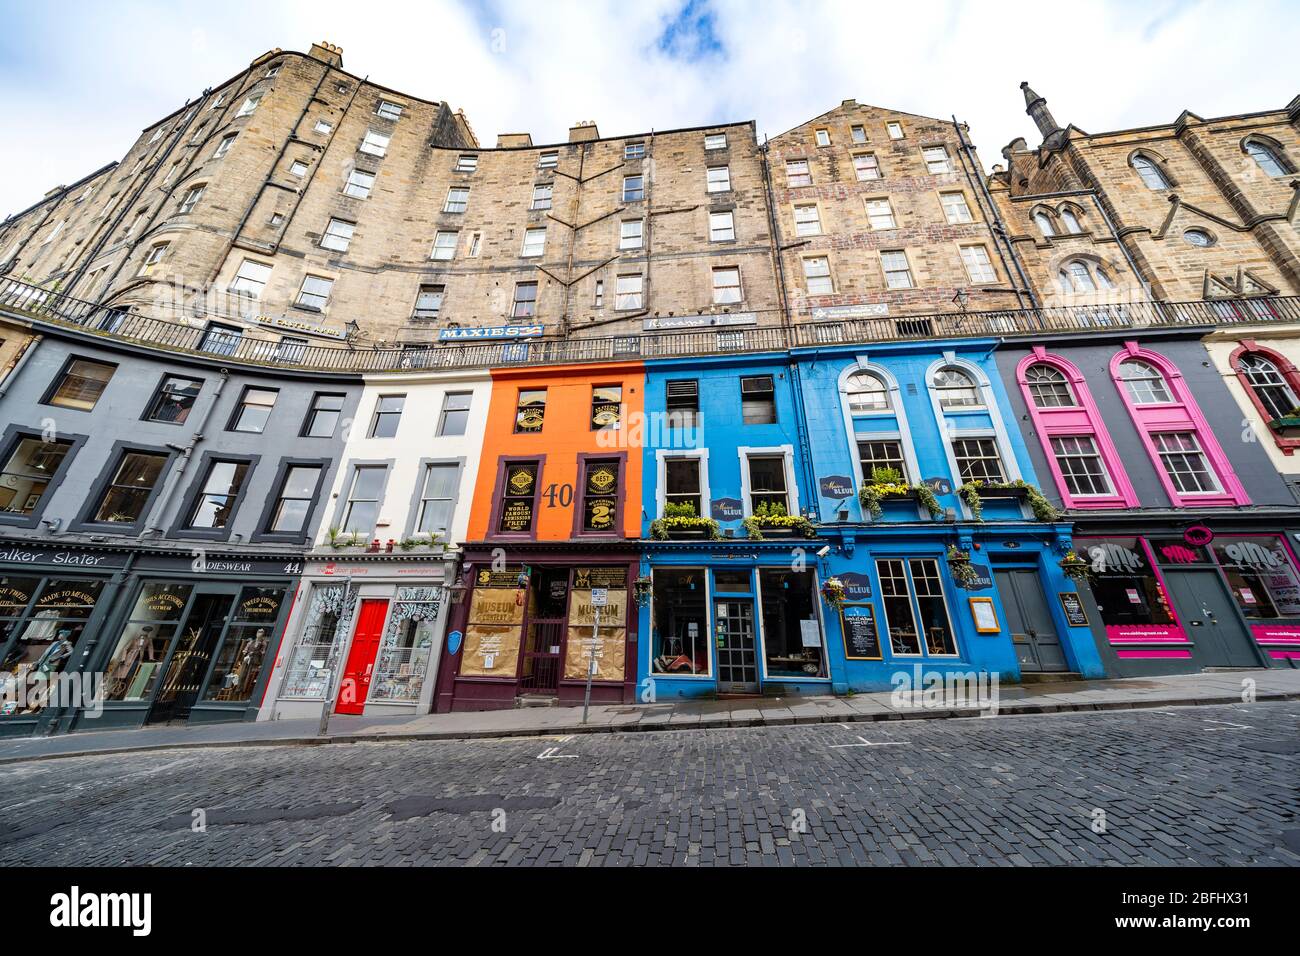 Edinburgh, Scotland, UK. 18 April 2020. Views of empty streets and members of the public outside on another Saturday during the coronavirus lockdown in Edinburgh. Shops and restaurants on Victoria Street are closed and street deserted. Iain Masterton/Alamy Live News Stock Photo